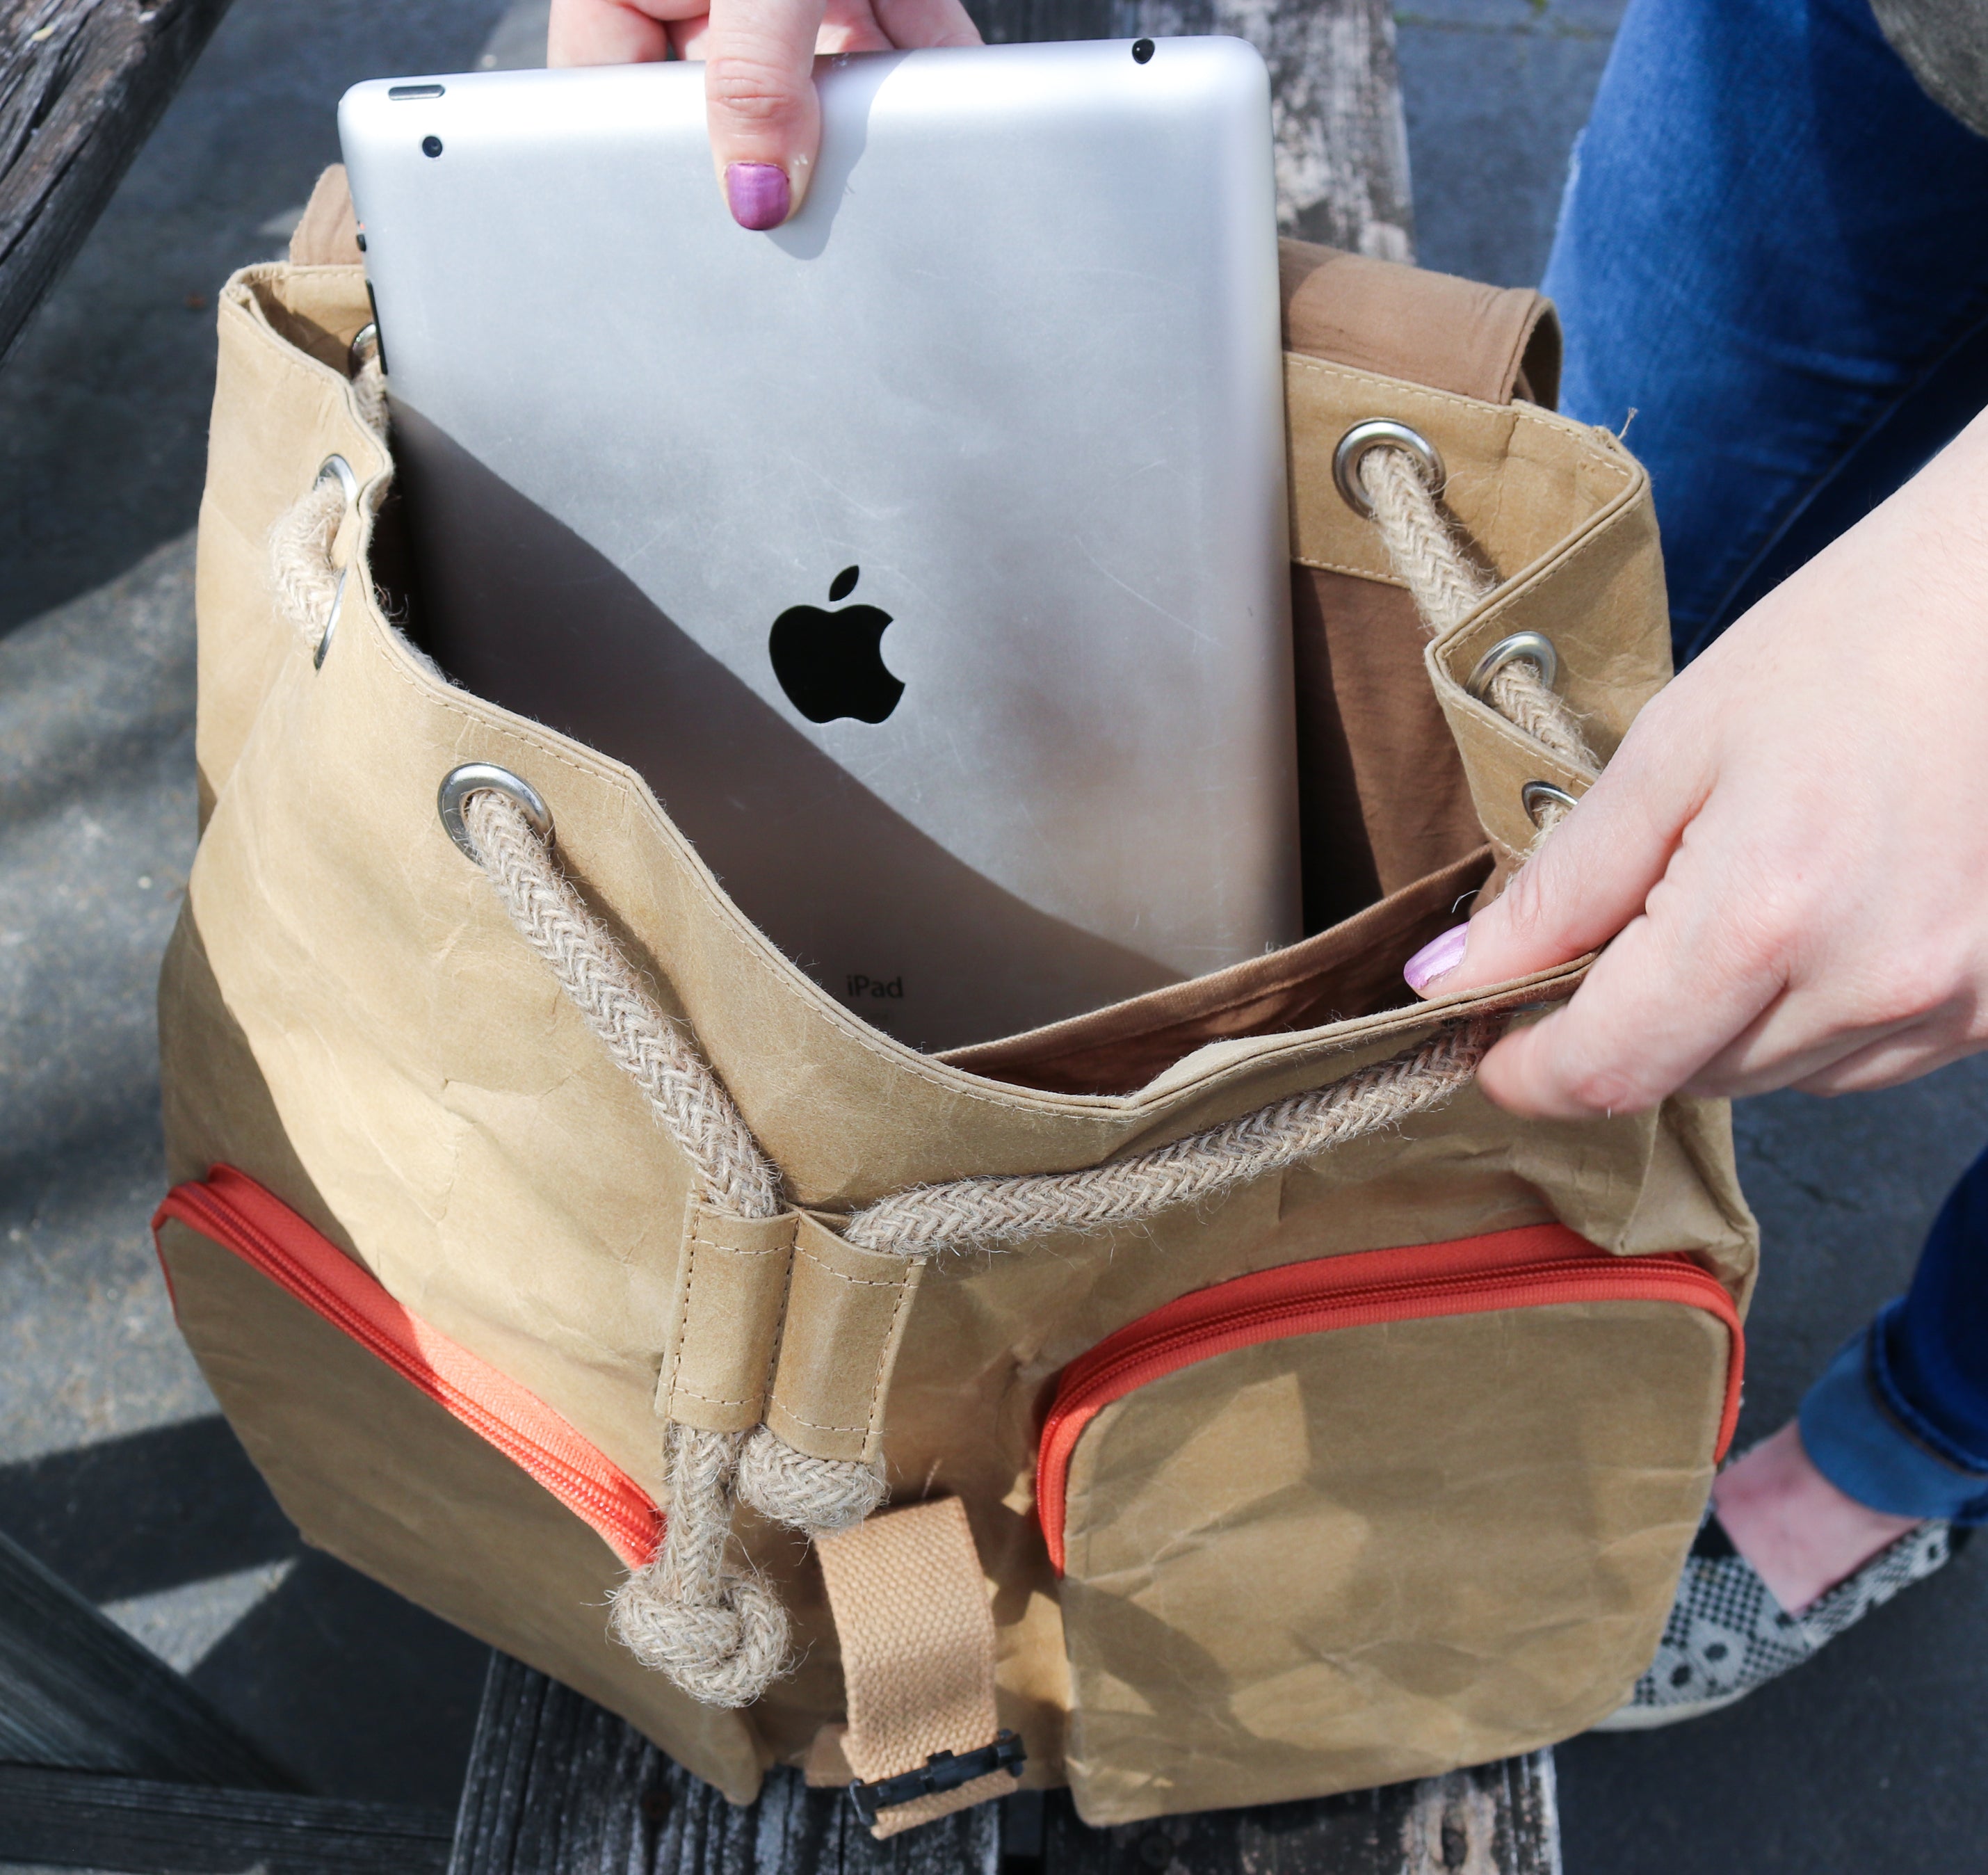 The Campus Carryall